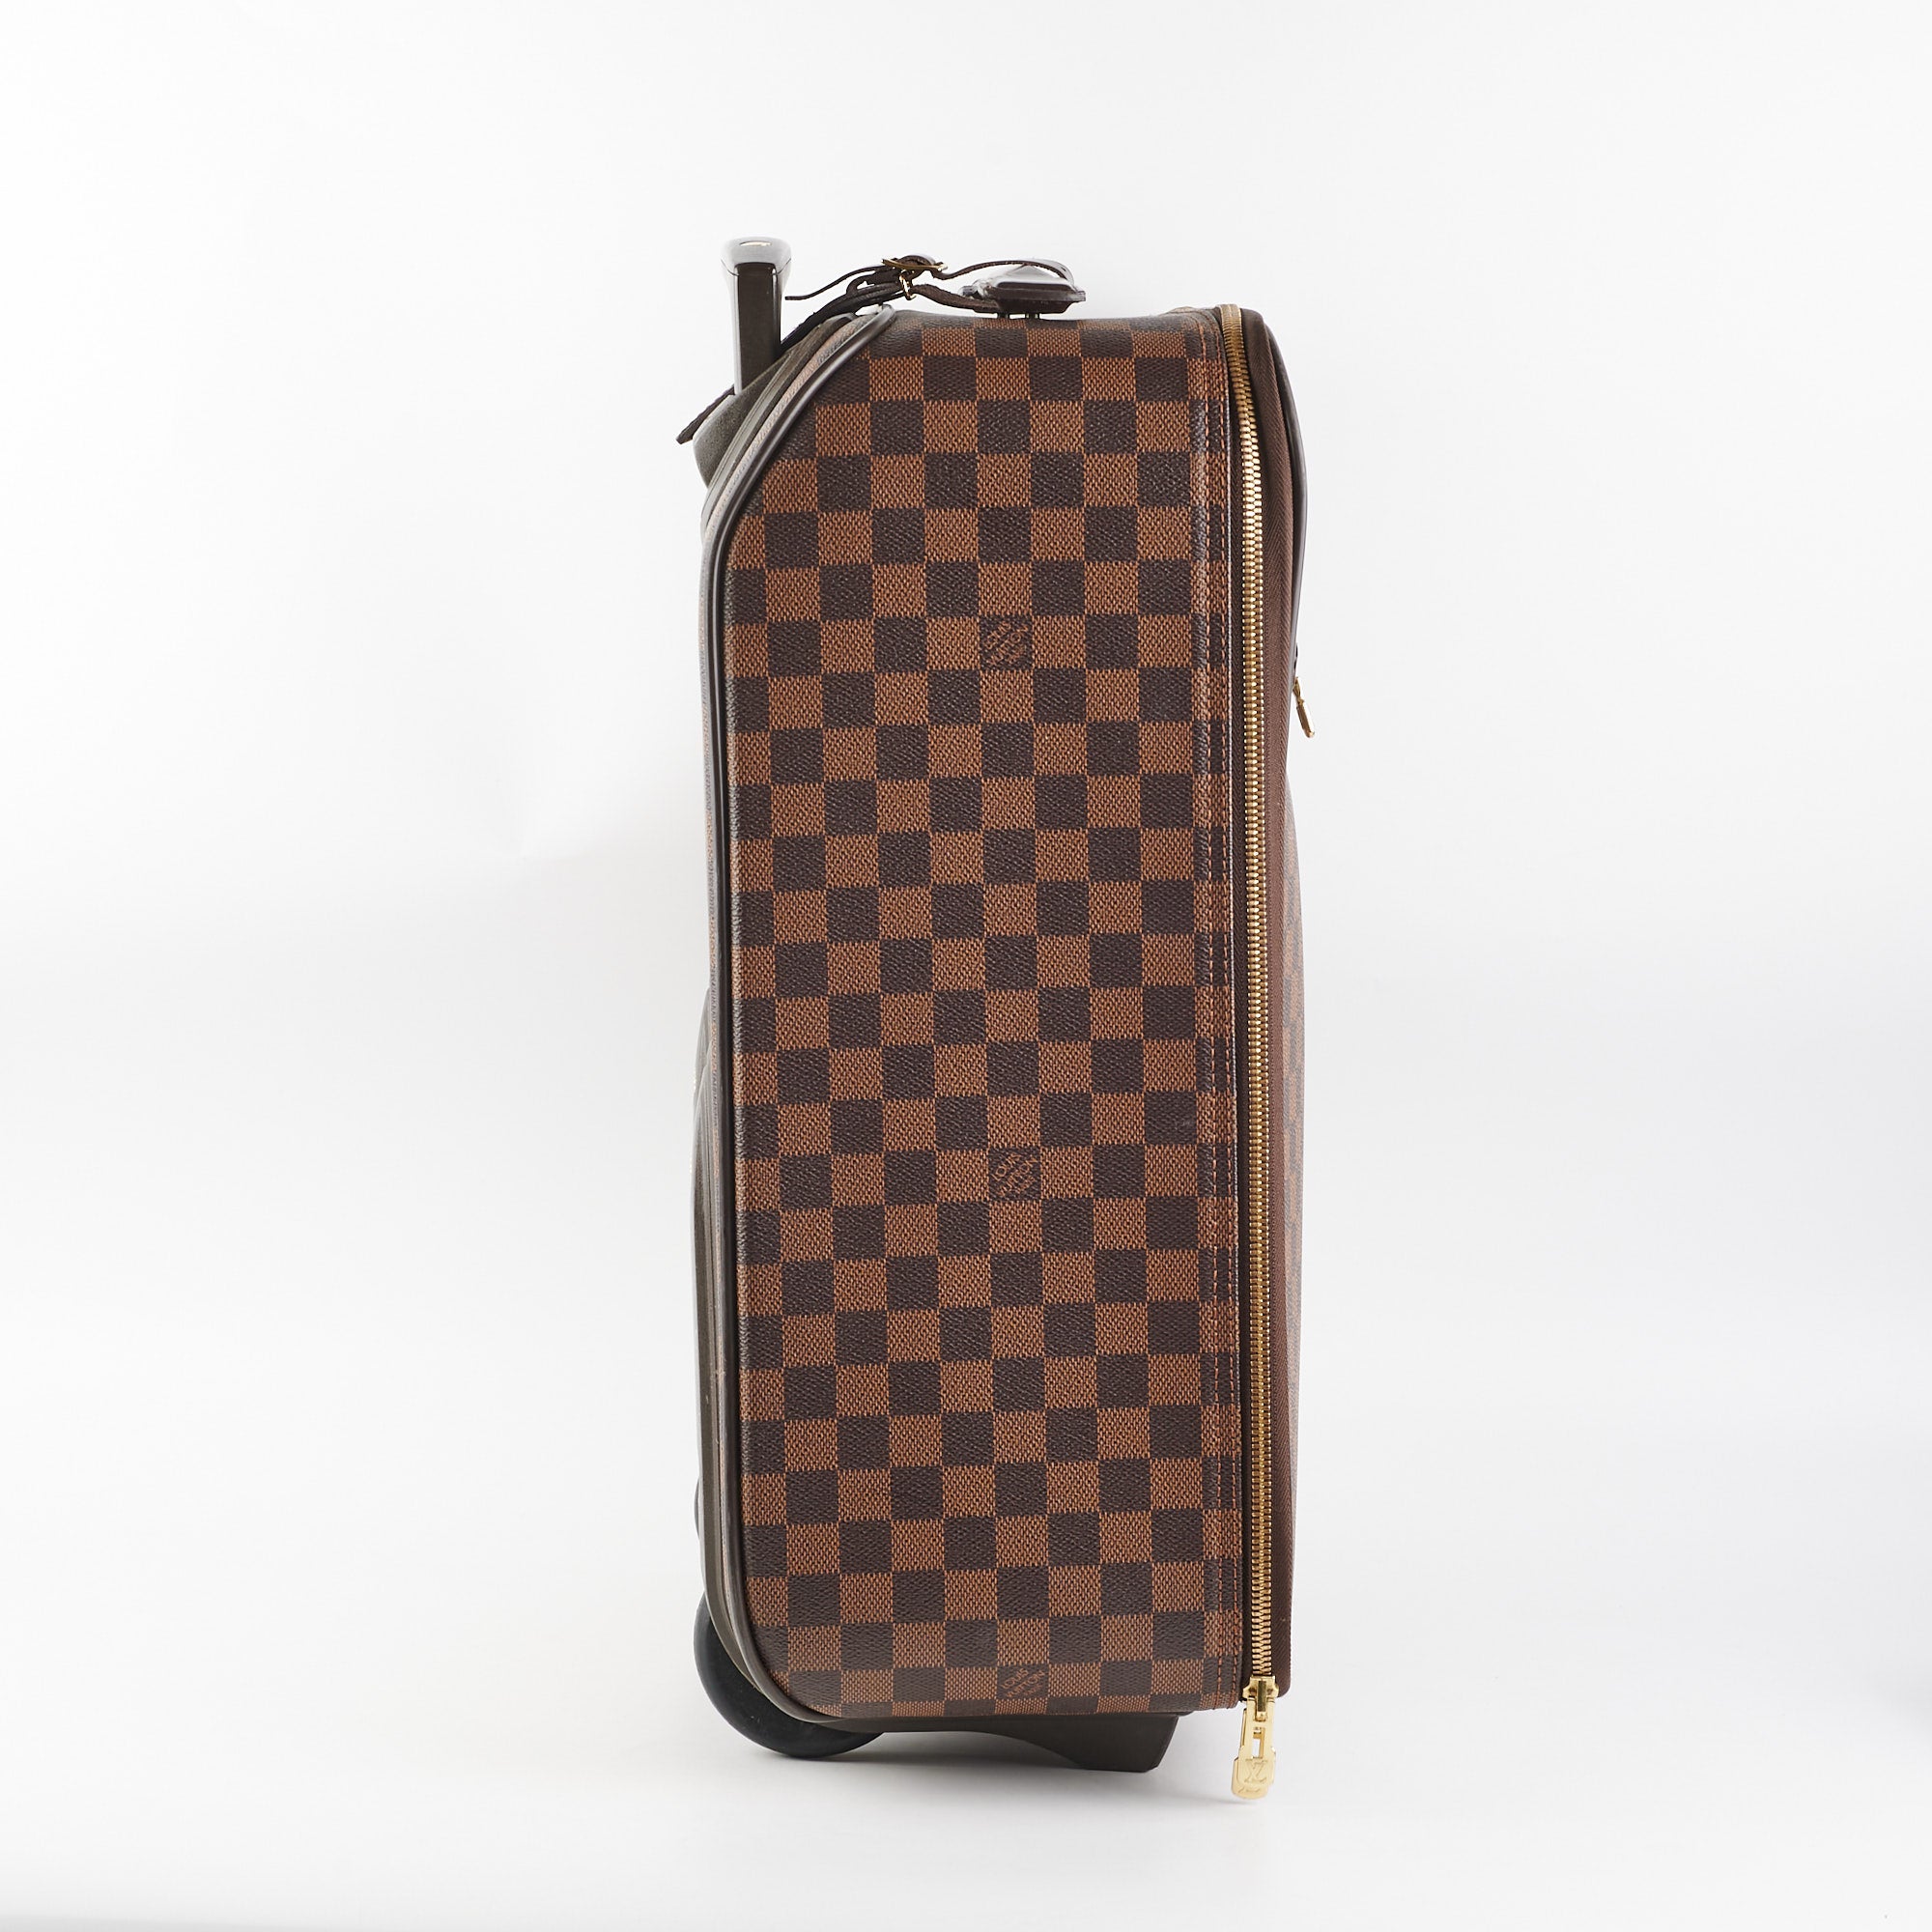 Louis Vuitton Legere 55 Rolling Luggage Carry-on Suitcase 870081 Travel Bag  For Sale at 1stDibs